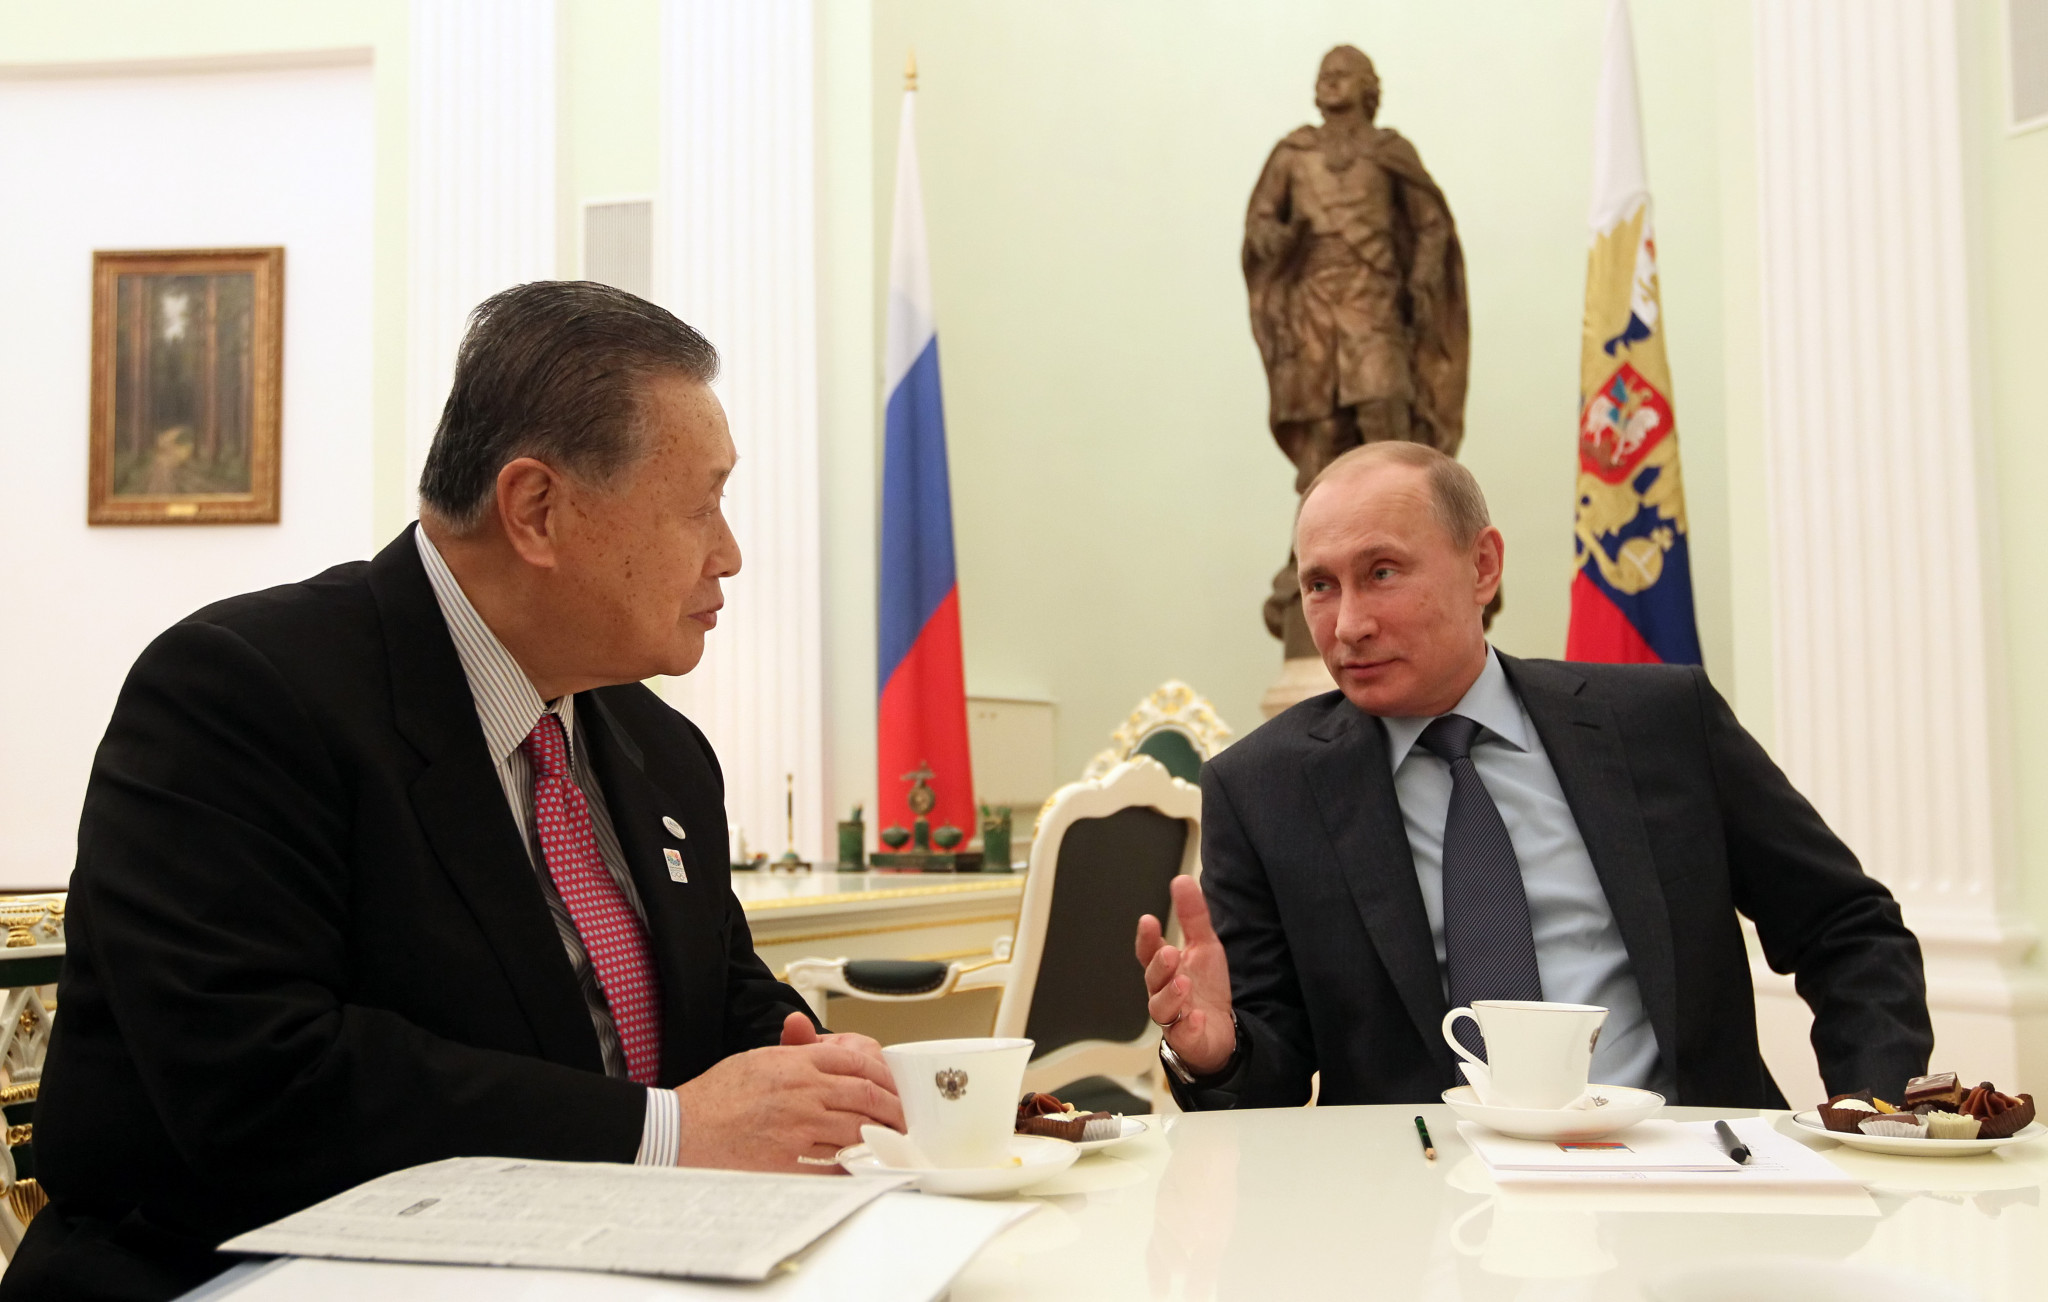 Yoshirō Mori, left, played a leading role in building relations with Russia and its President Vladimir Putin, right, who awarded him the Order of Friendship ©Getty Images 